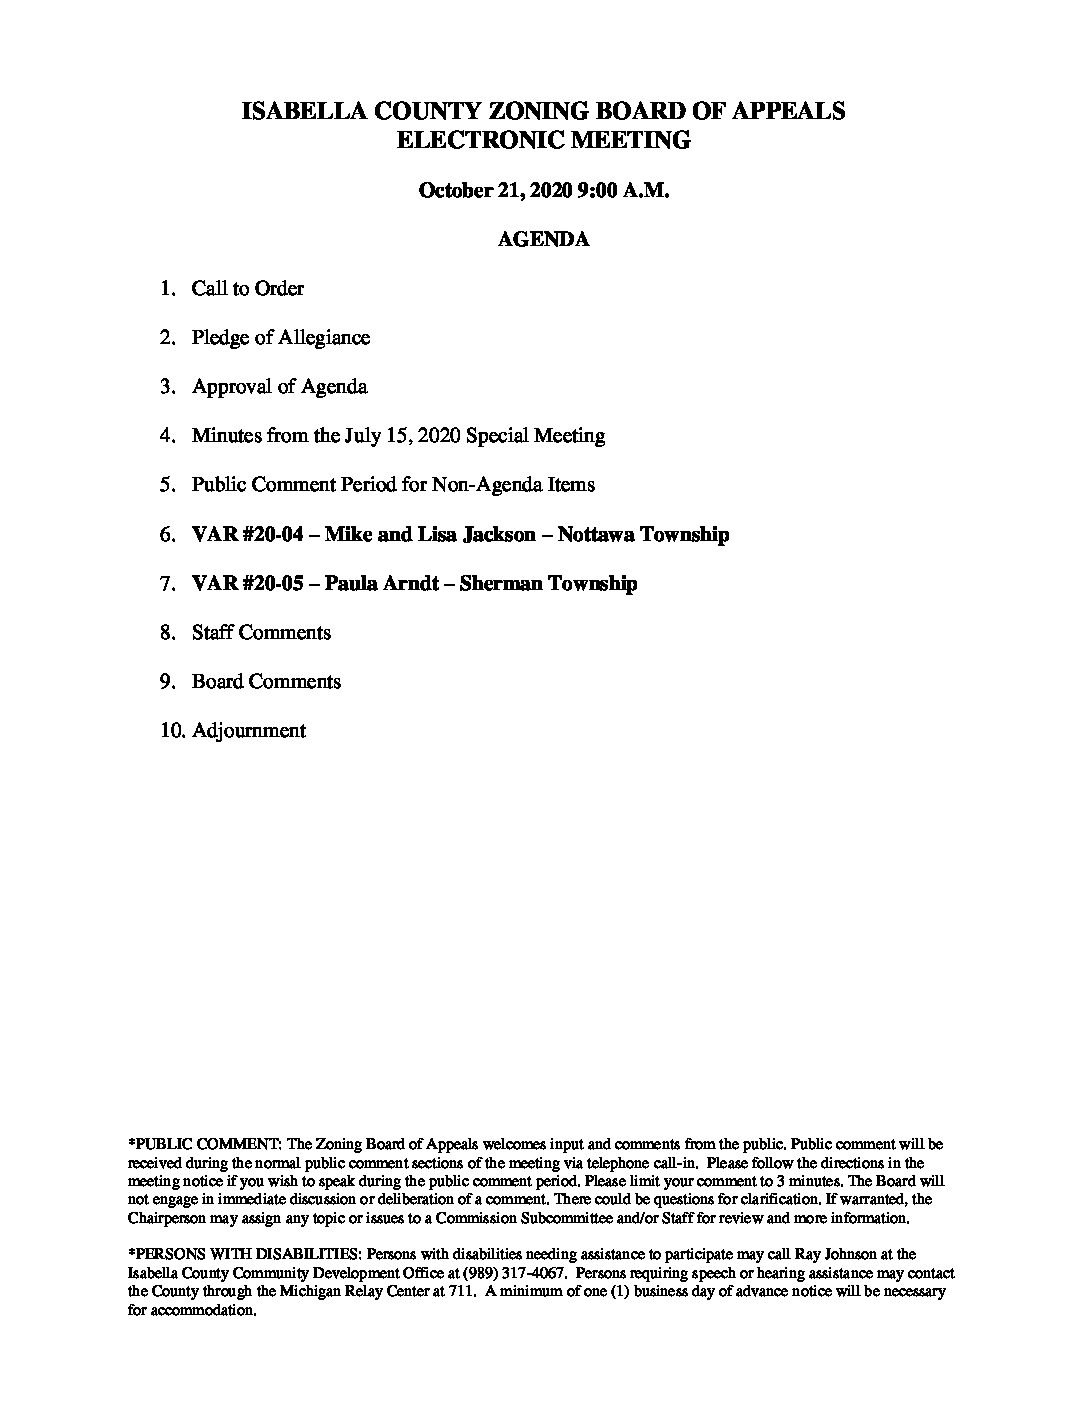 preview image of first page October 21, 2020 Agenda